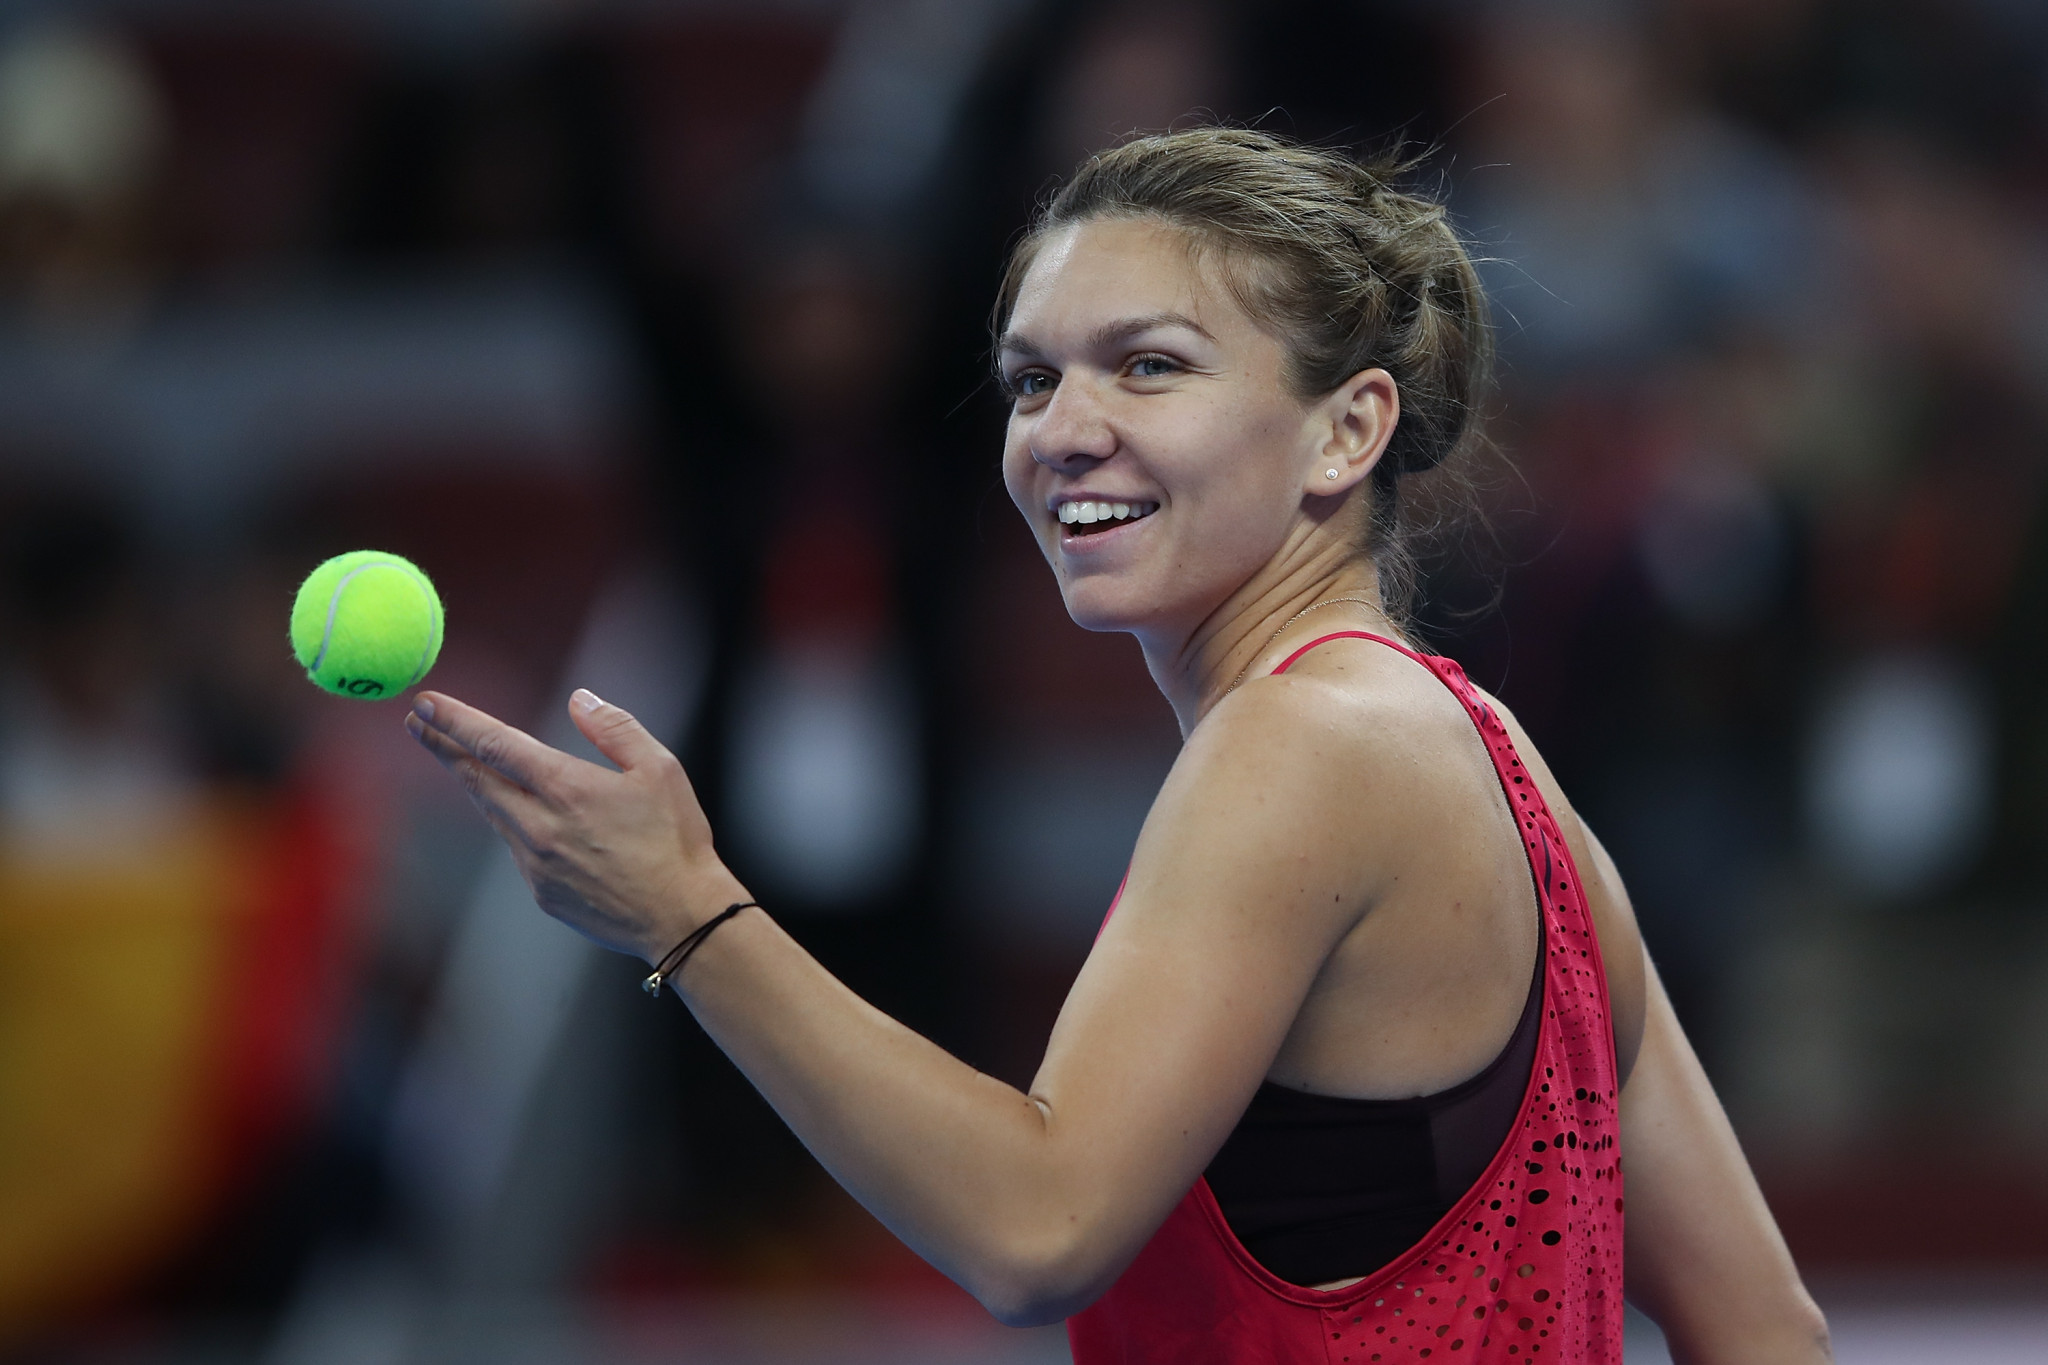 Simona Halep donated a five-figure sum privately to help efforts against COVID-19 ©Getty Images